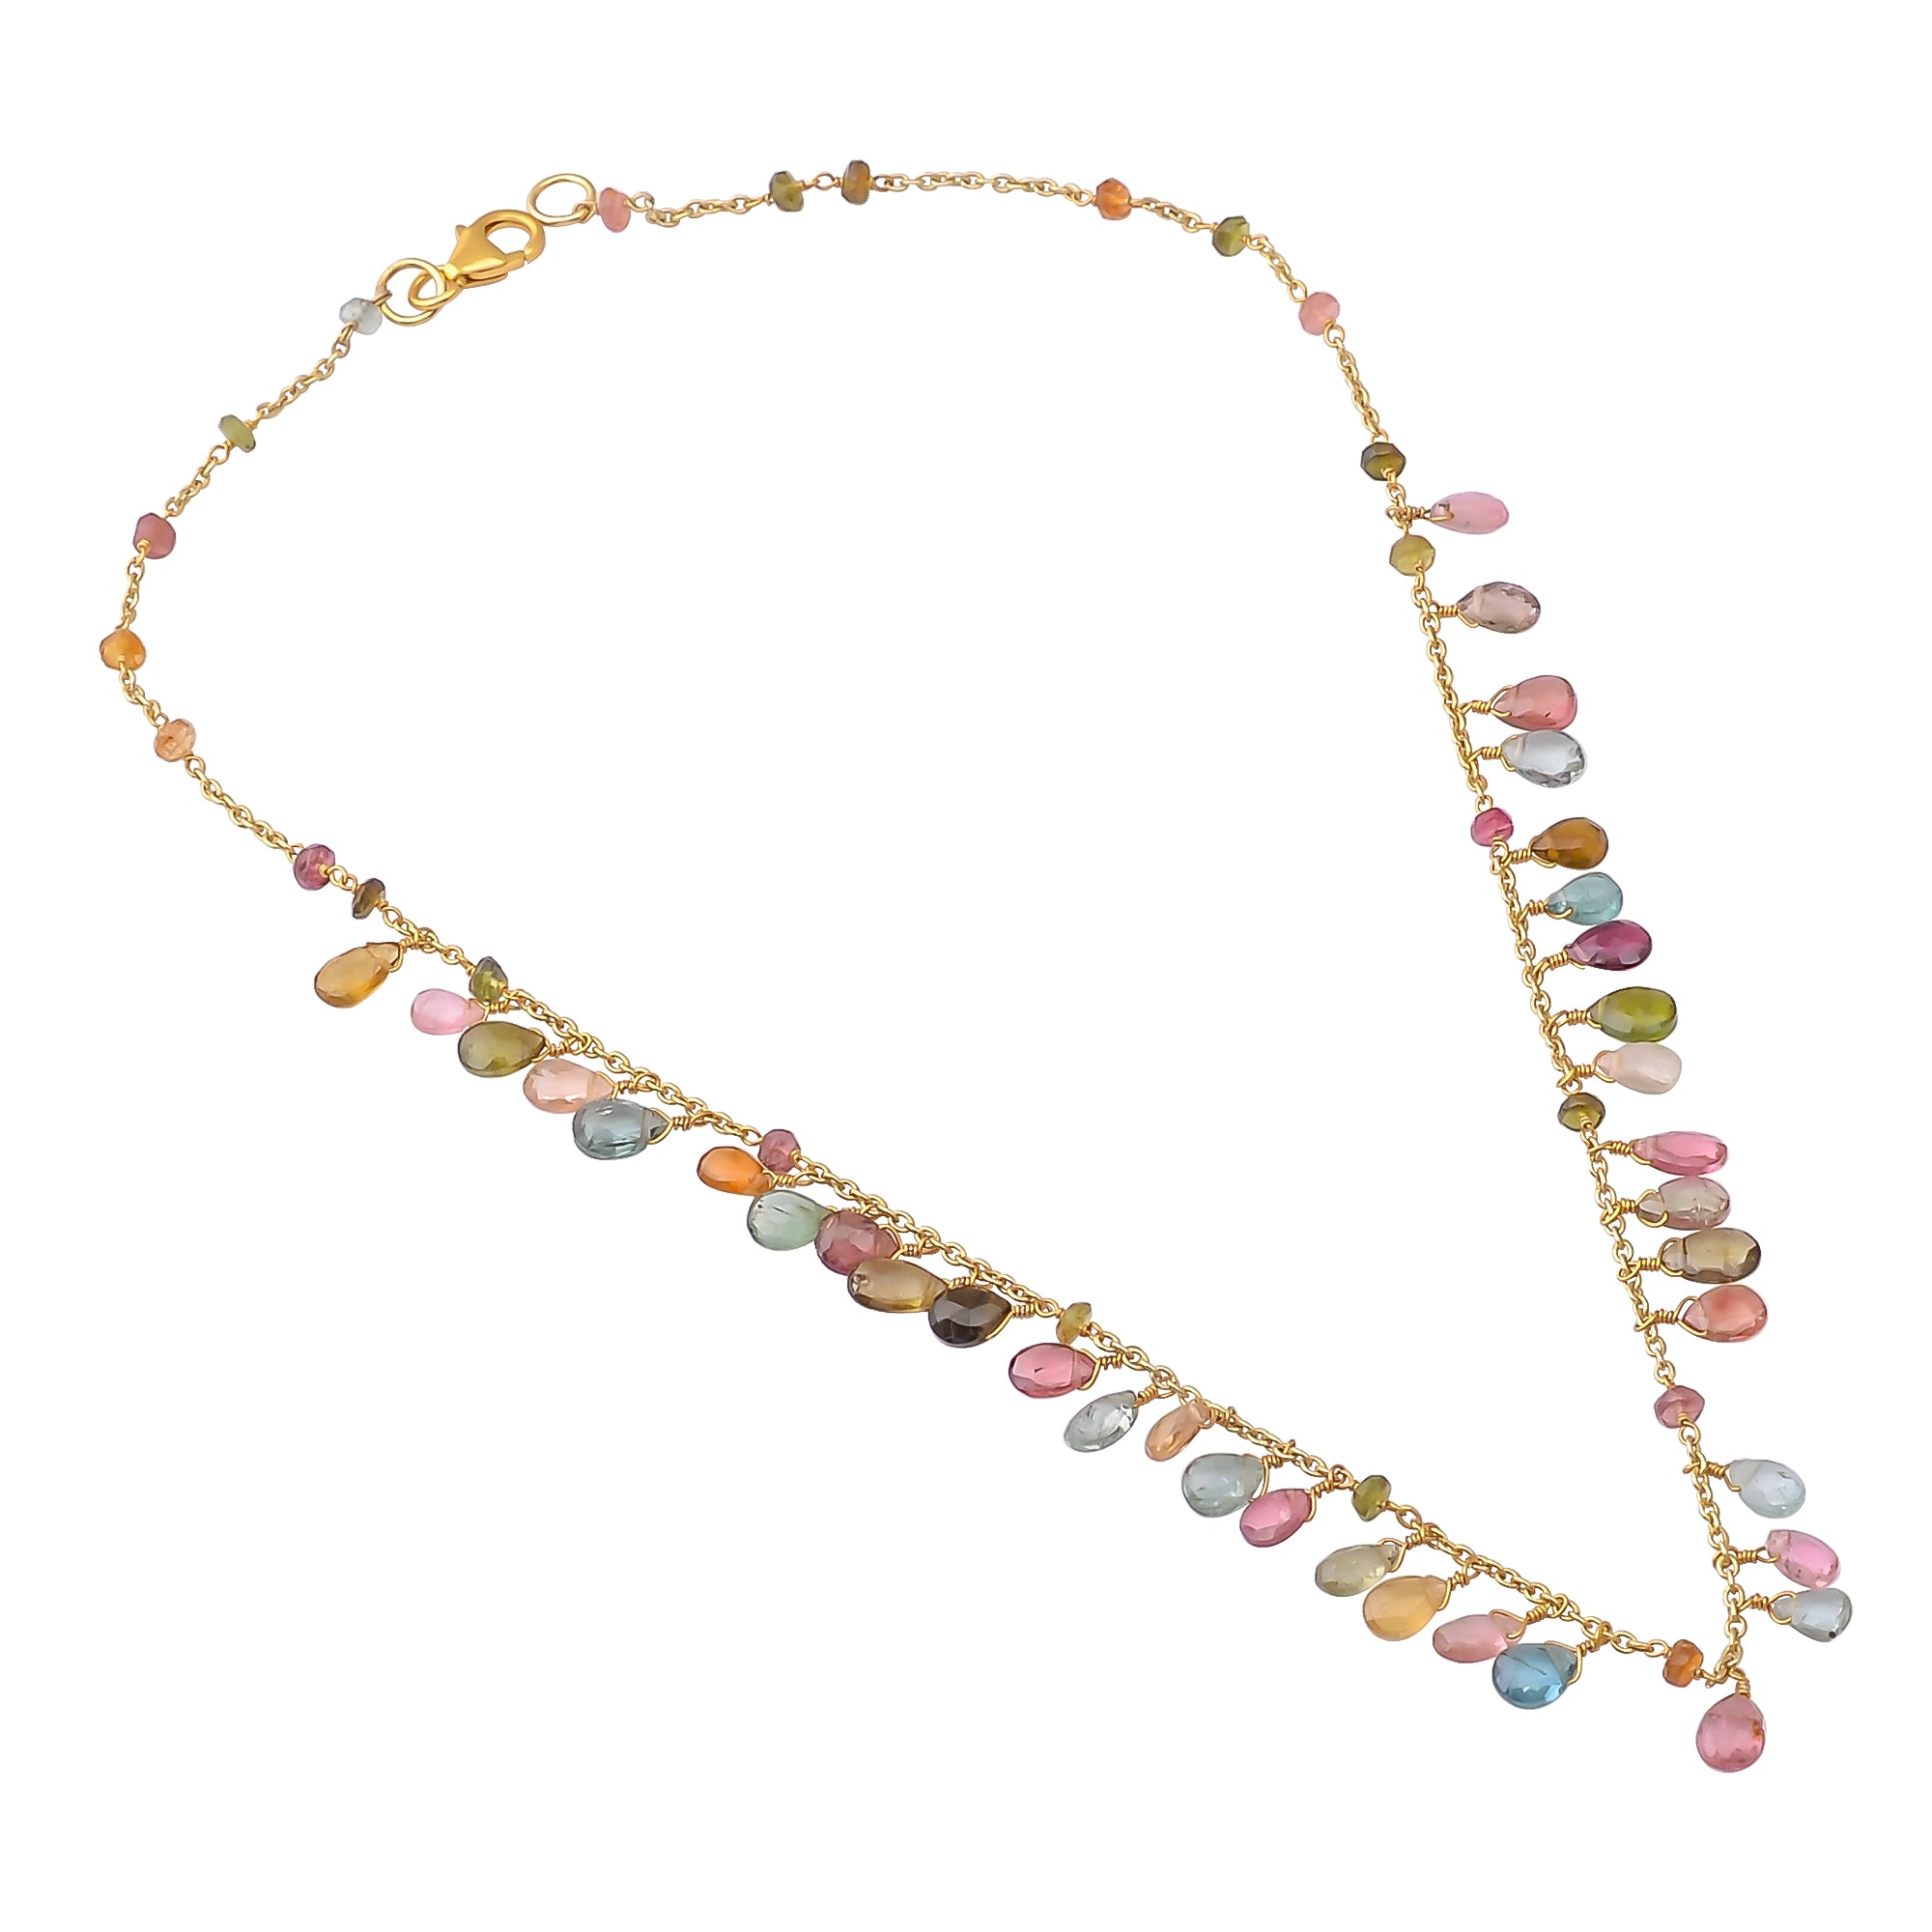 Buy Indian Handmade Silver Gold Plated Multi Tourmaline Necklace